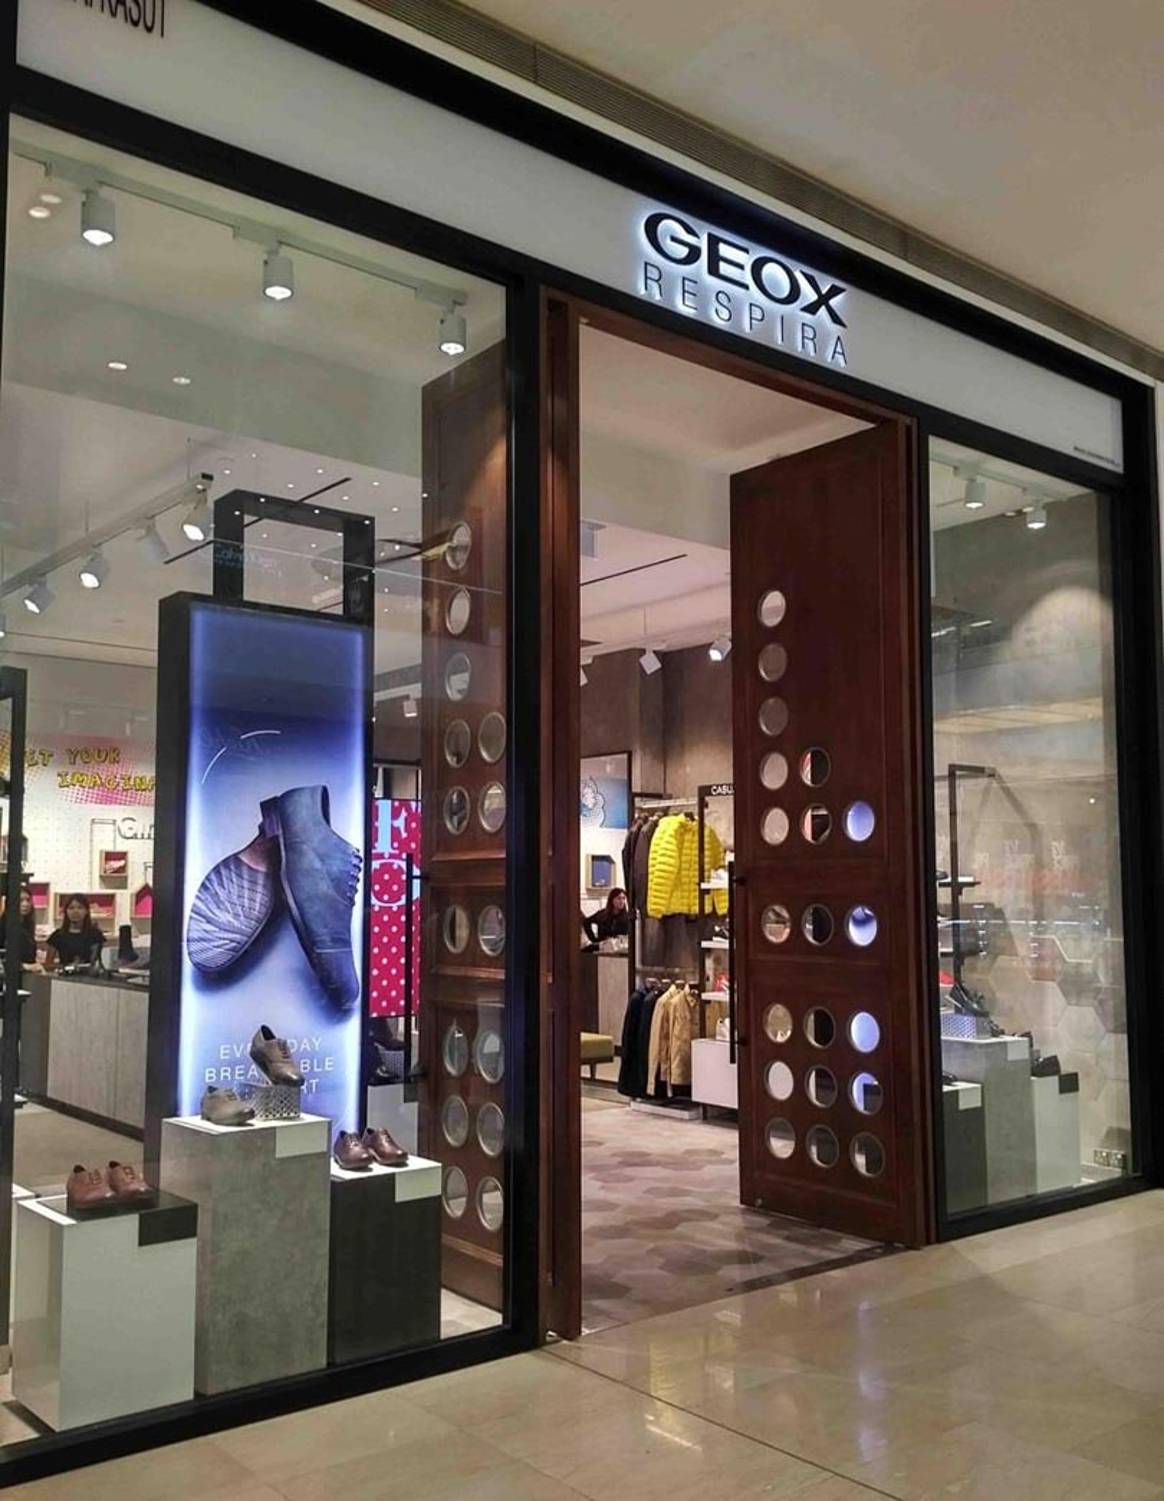 In Pictures: Geox unveils new store concept 'X Store'